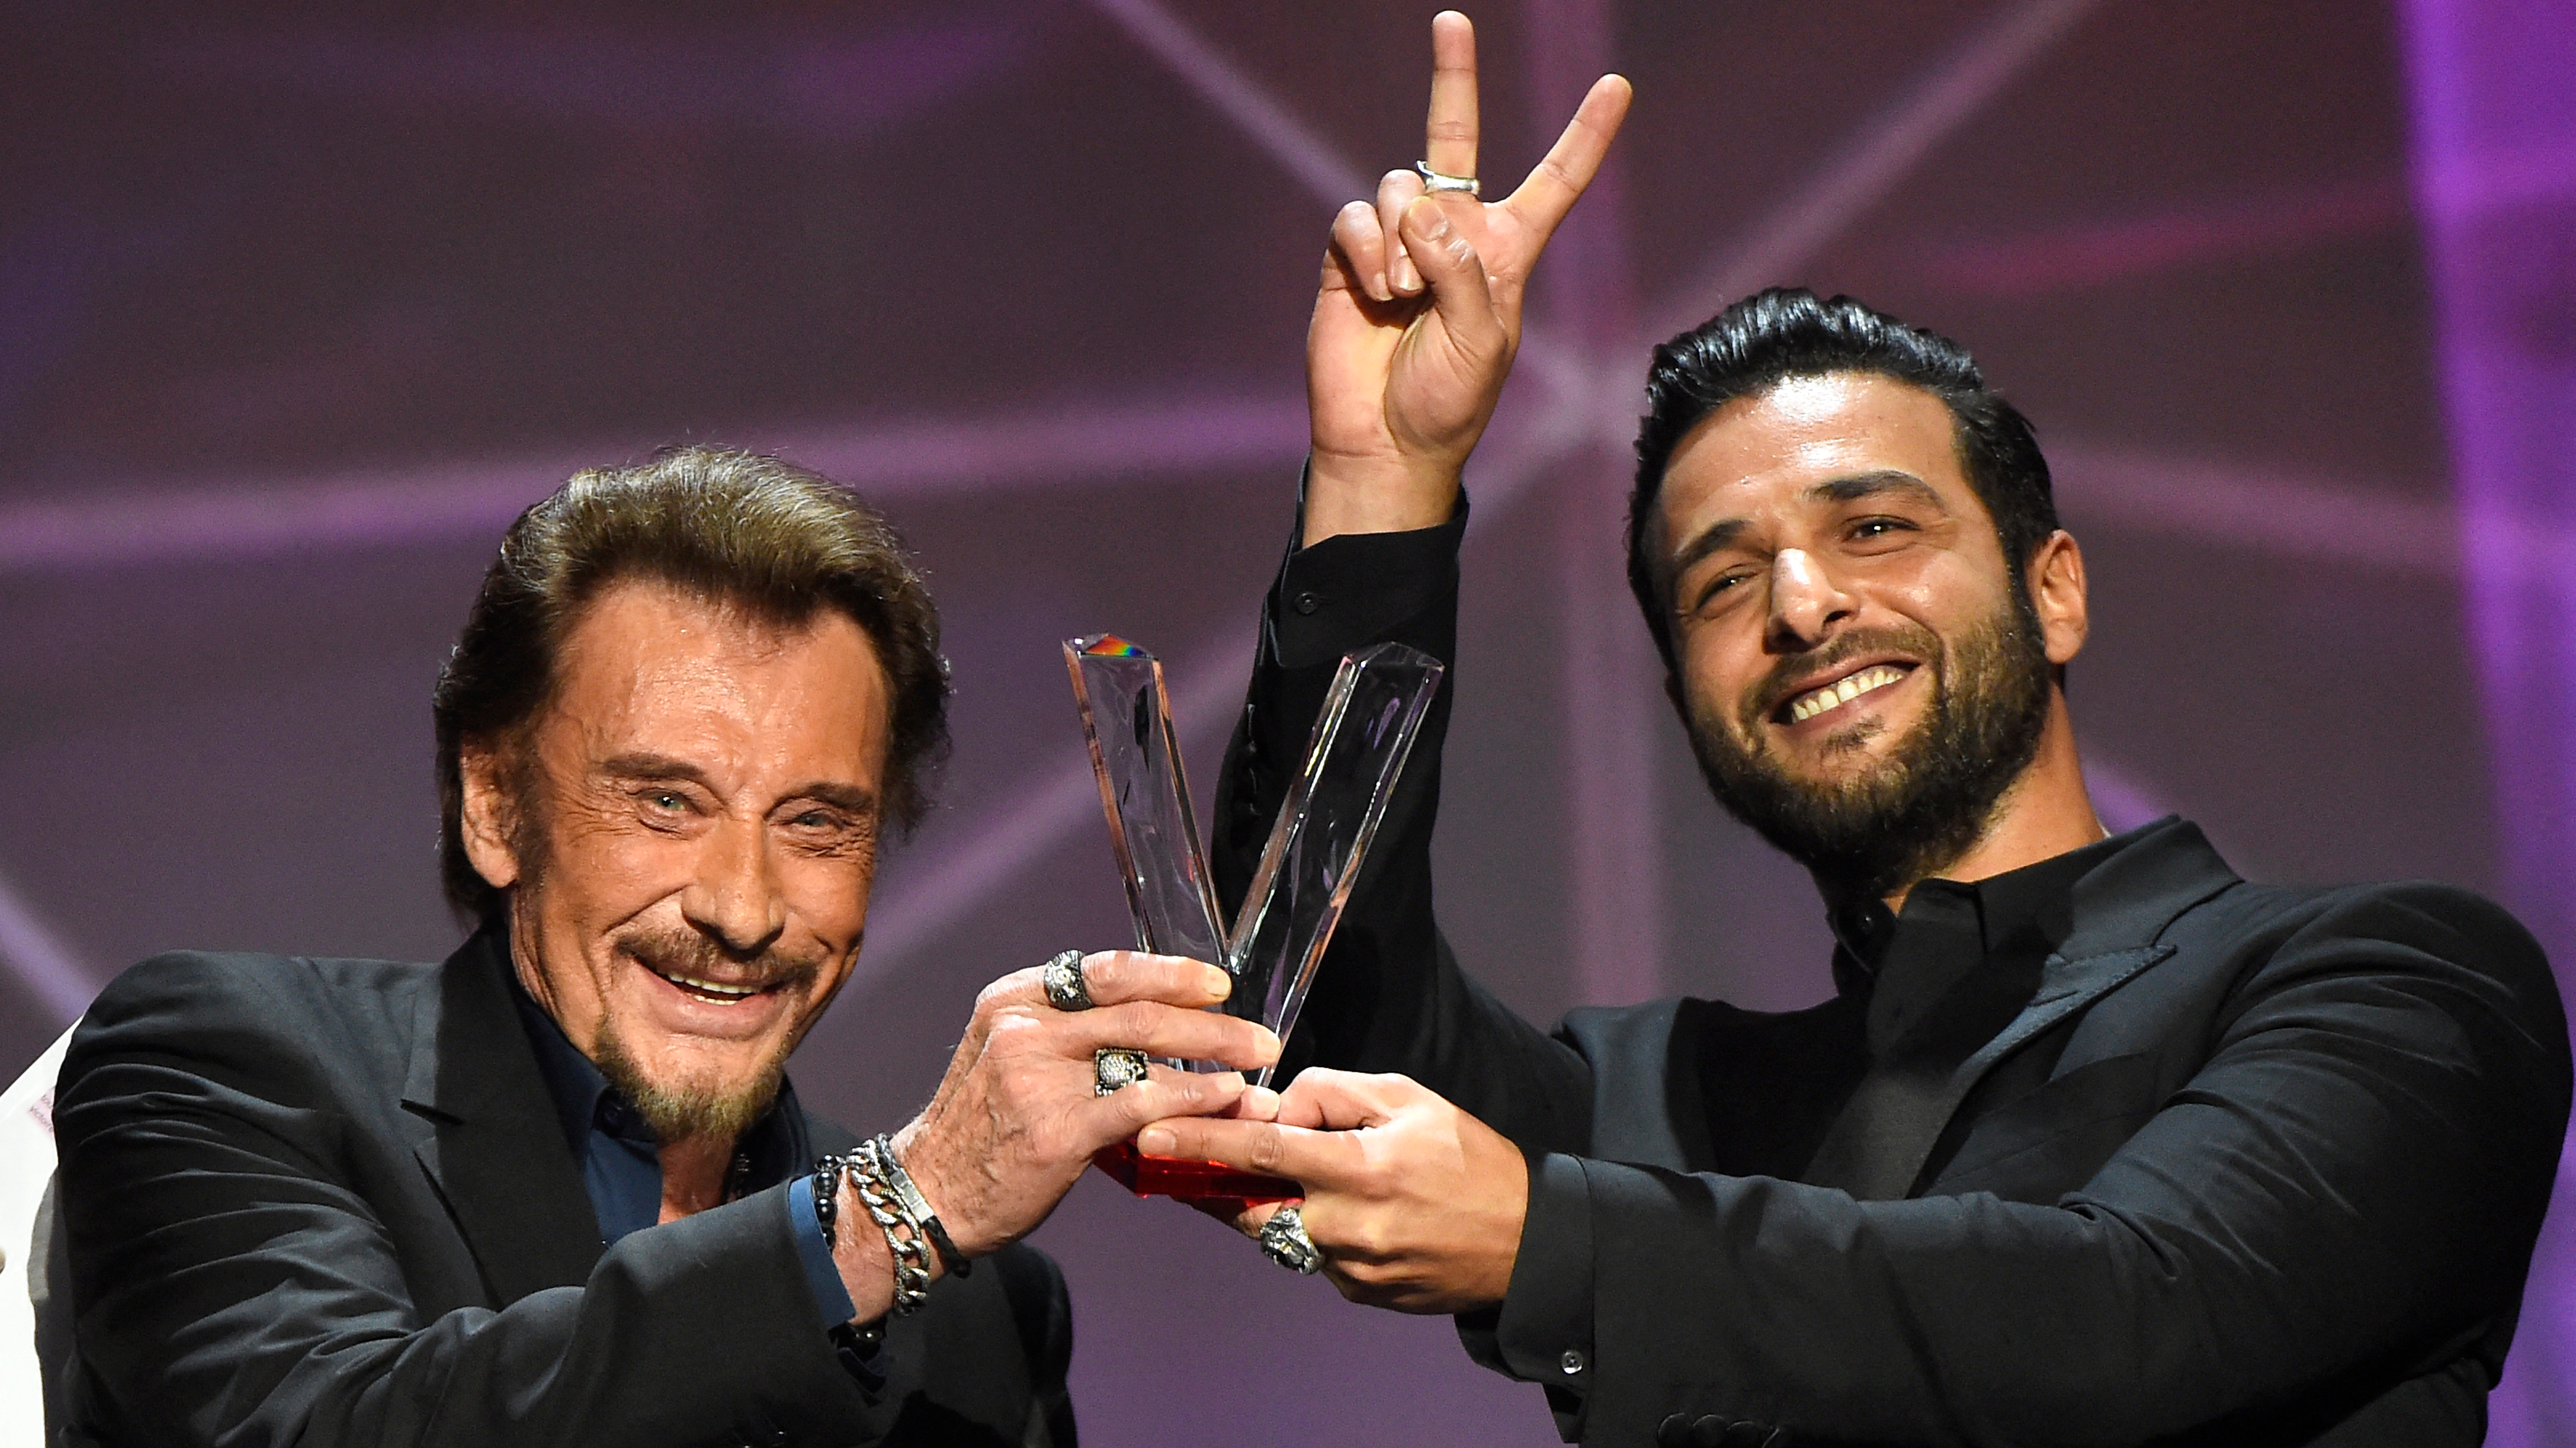 Hallyday receives the best album award composed by Yodelice (right) at the 31st Victoires de la Musique in France in 2016. /Bertrand Guay/AFP